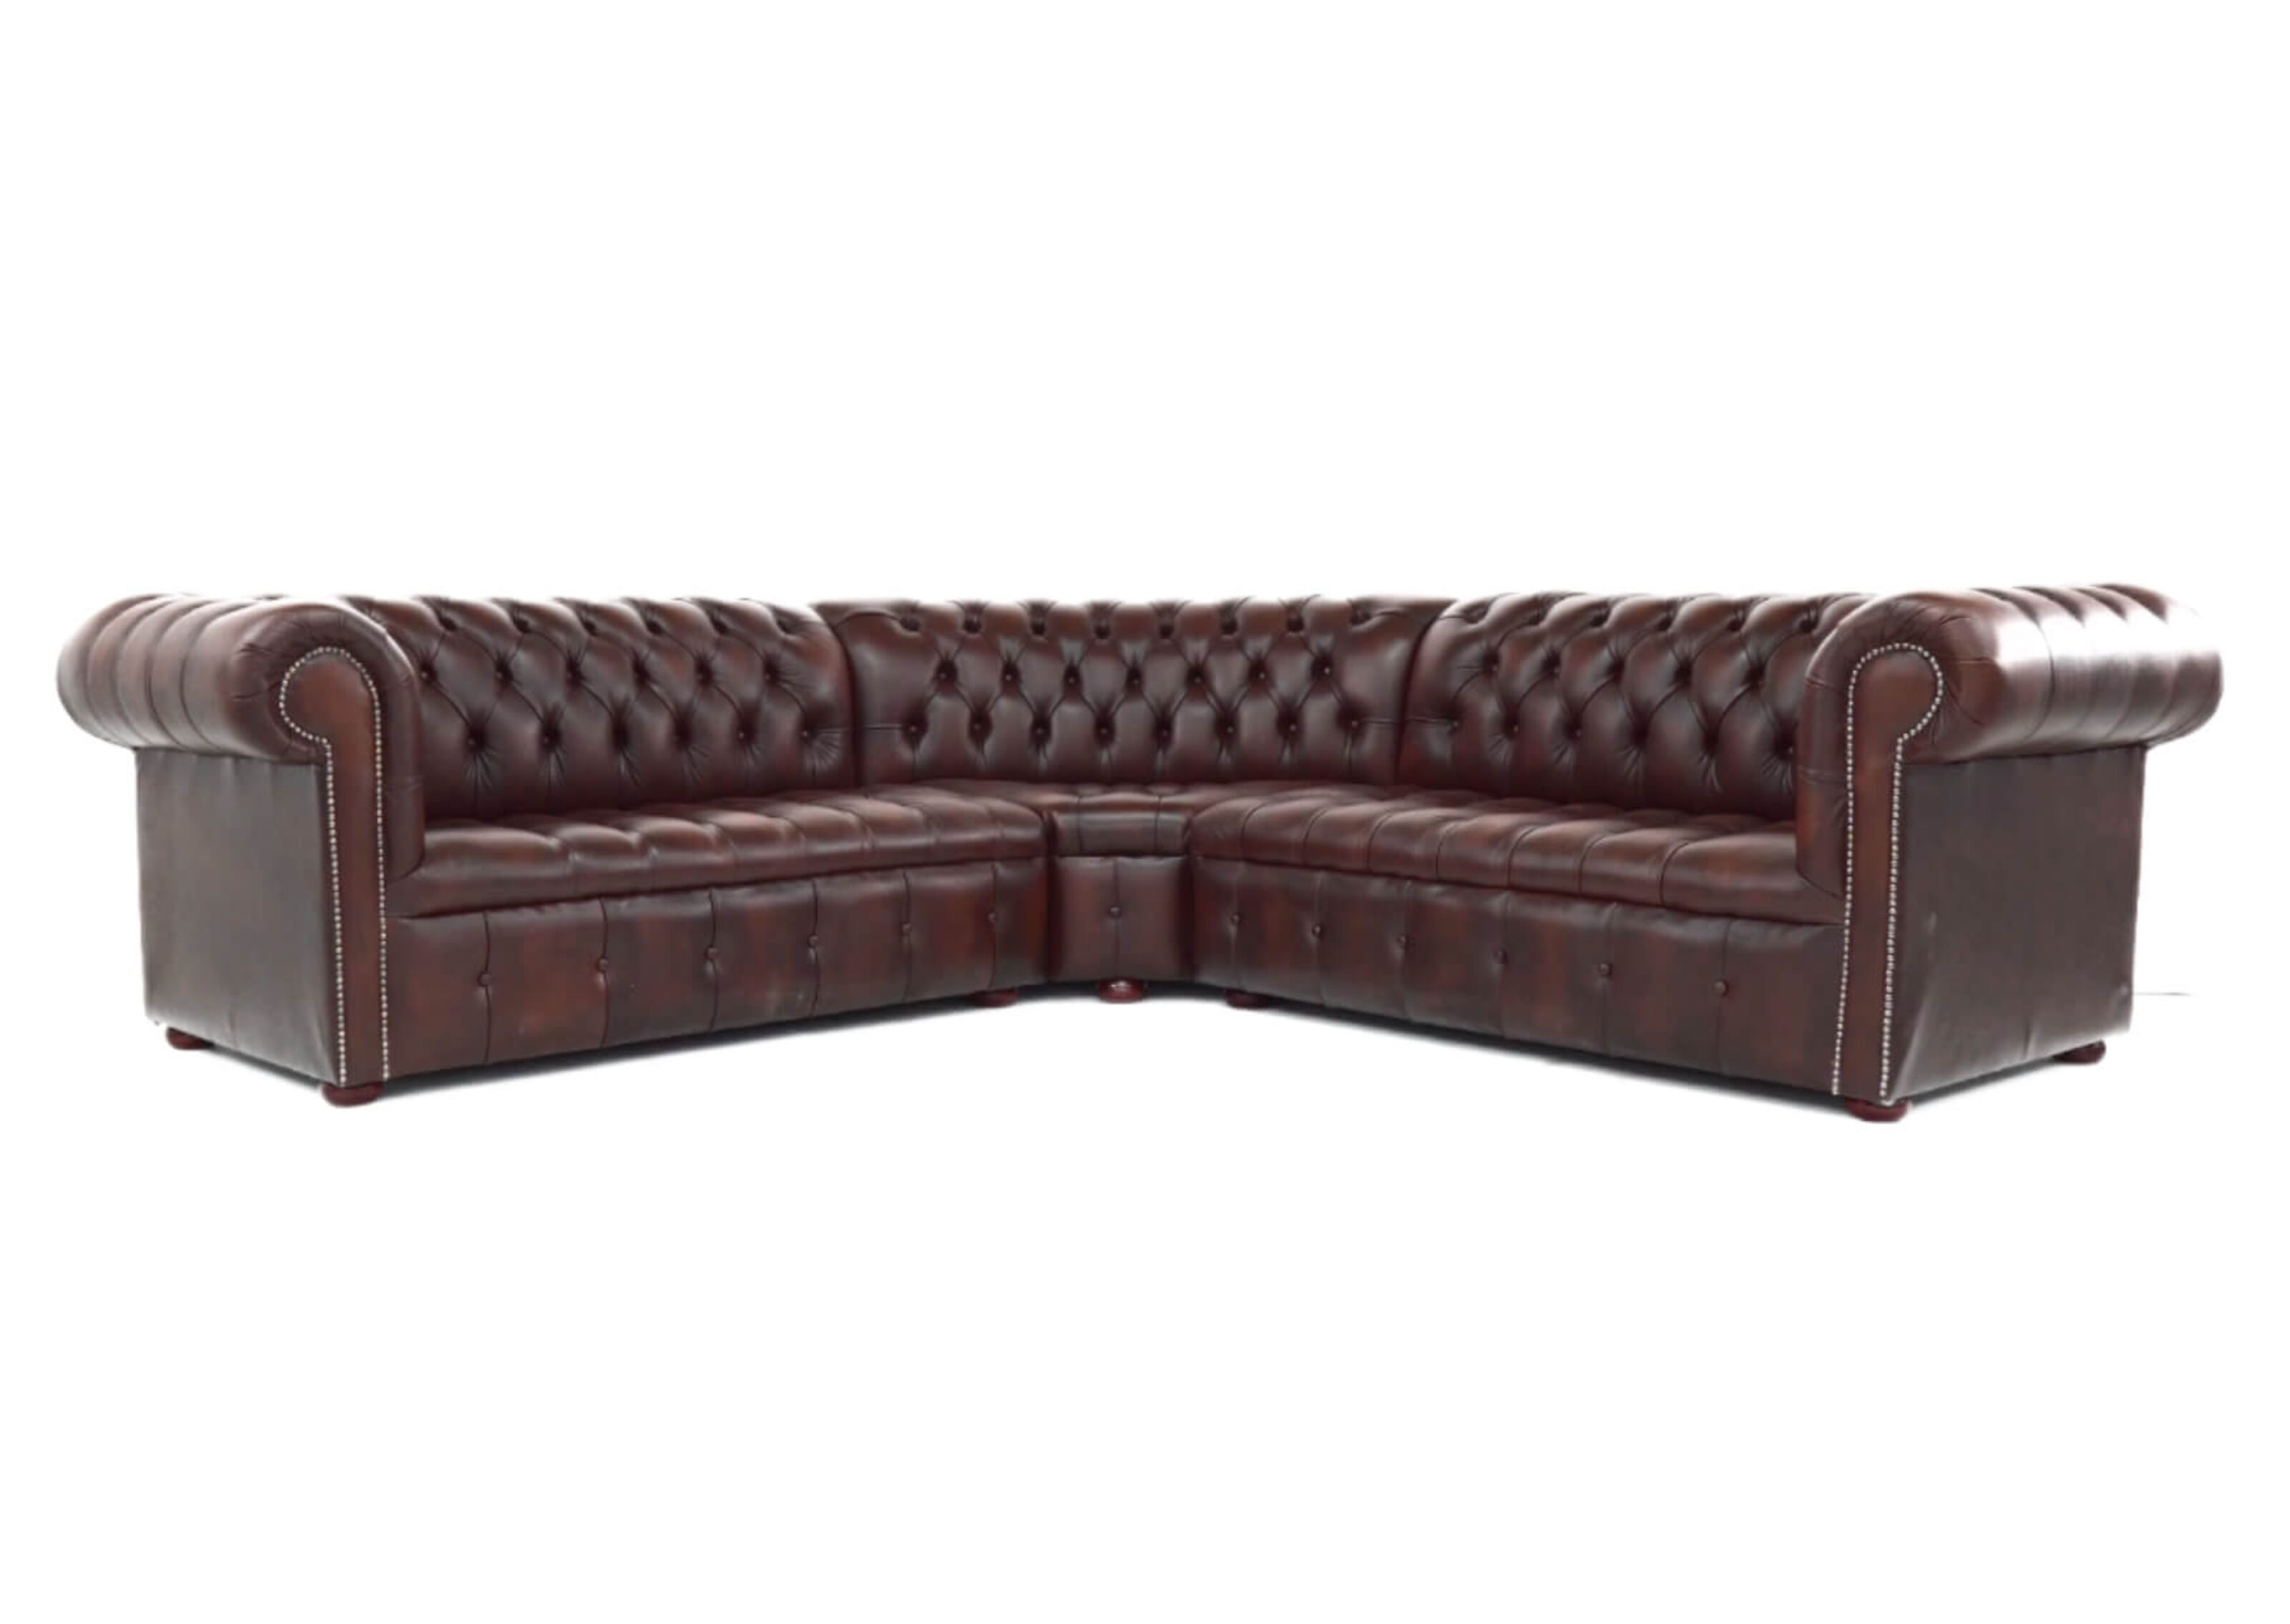 Elegance in Spain The Allure of Chesterfield Sofas  %Post Title